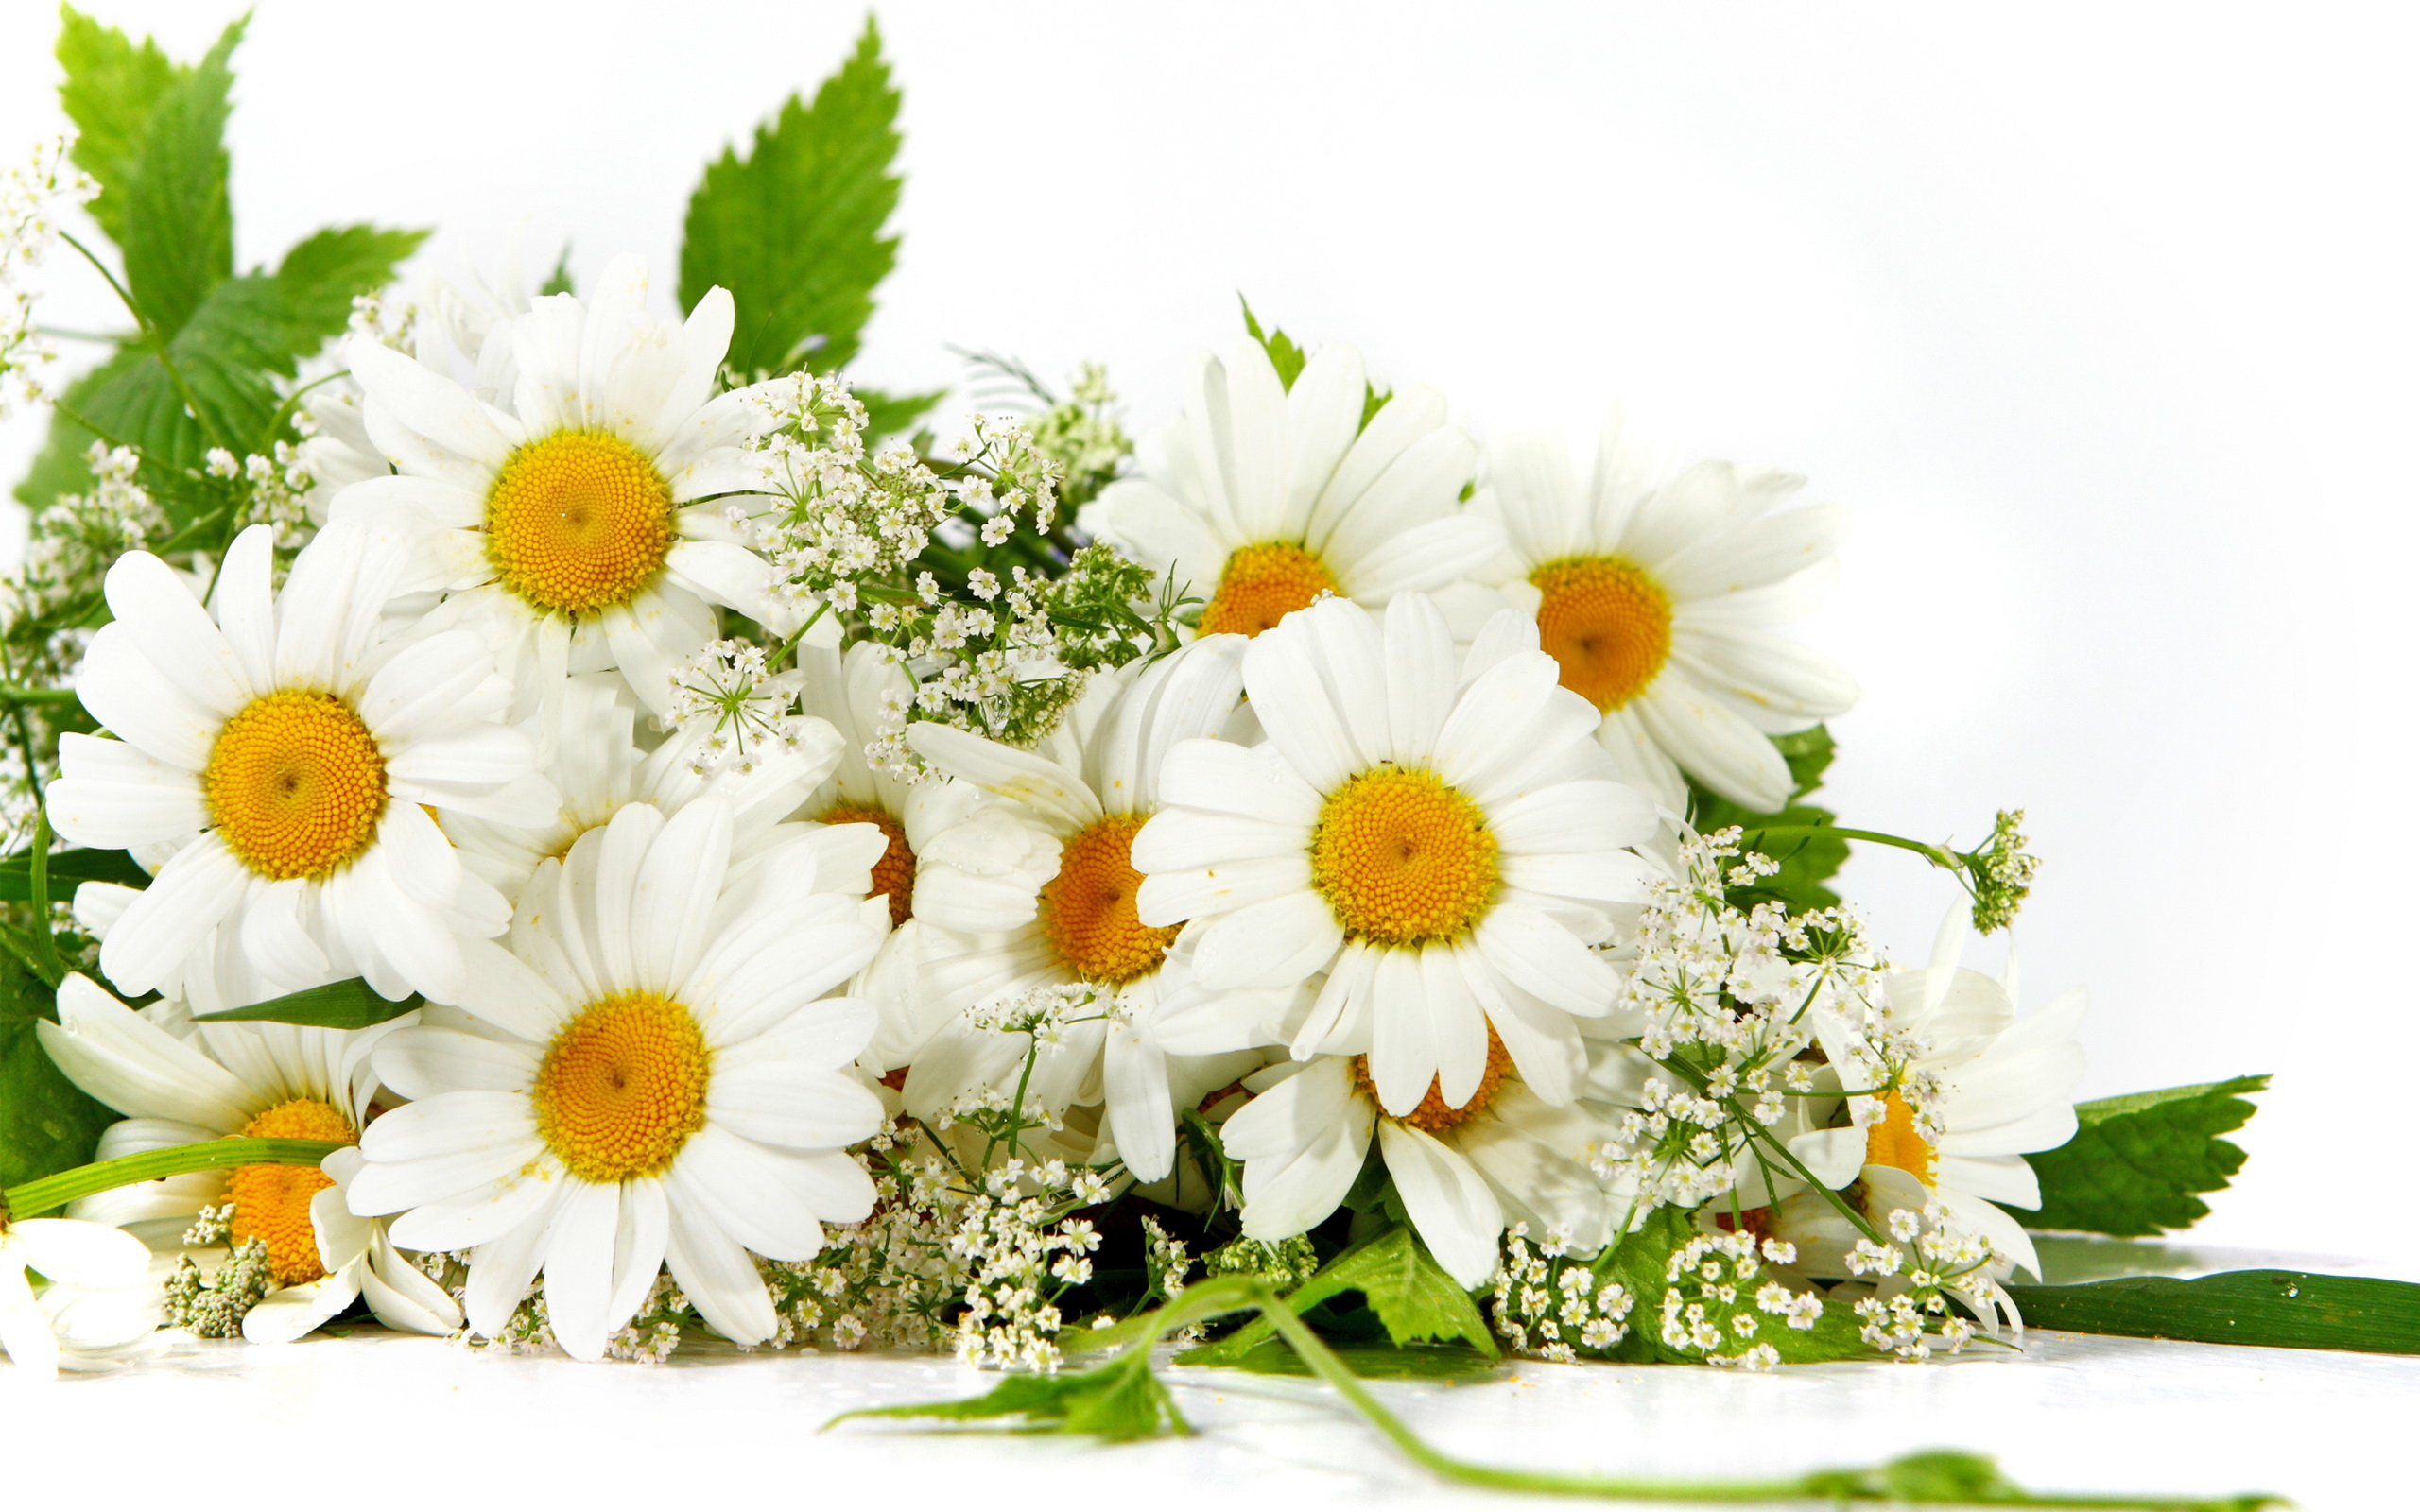 Nature_Flowers_Bouquet_of_daisies_030152_.jpg